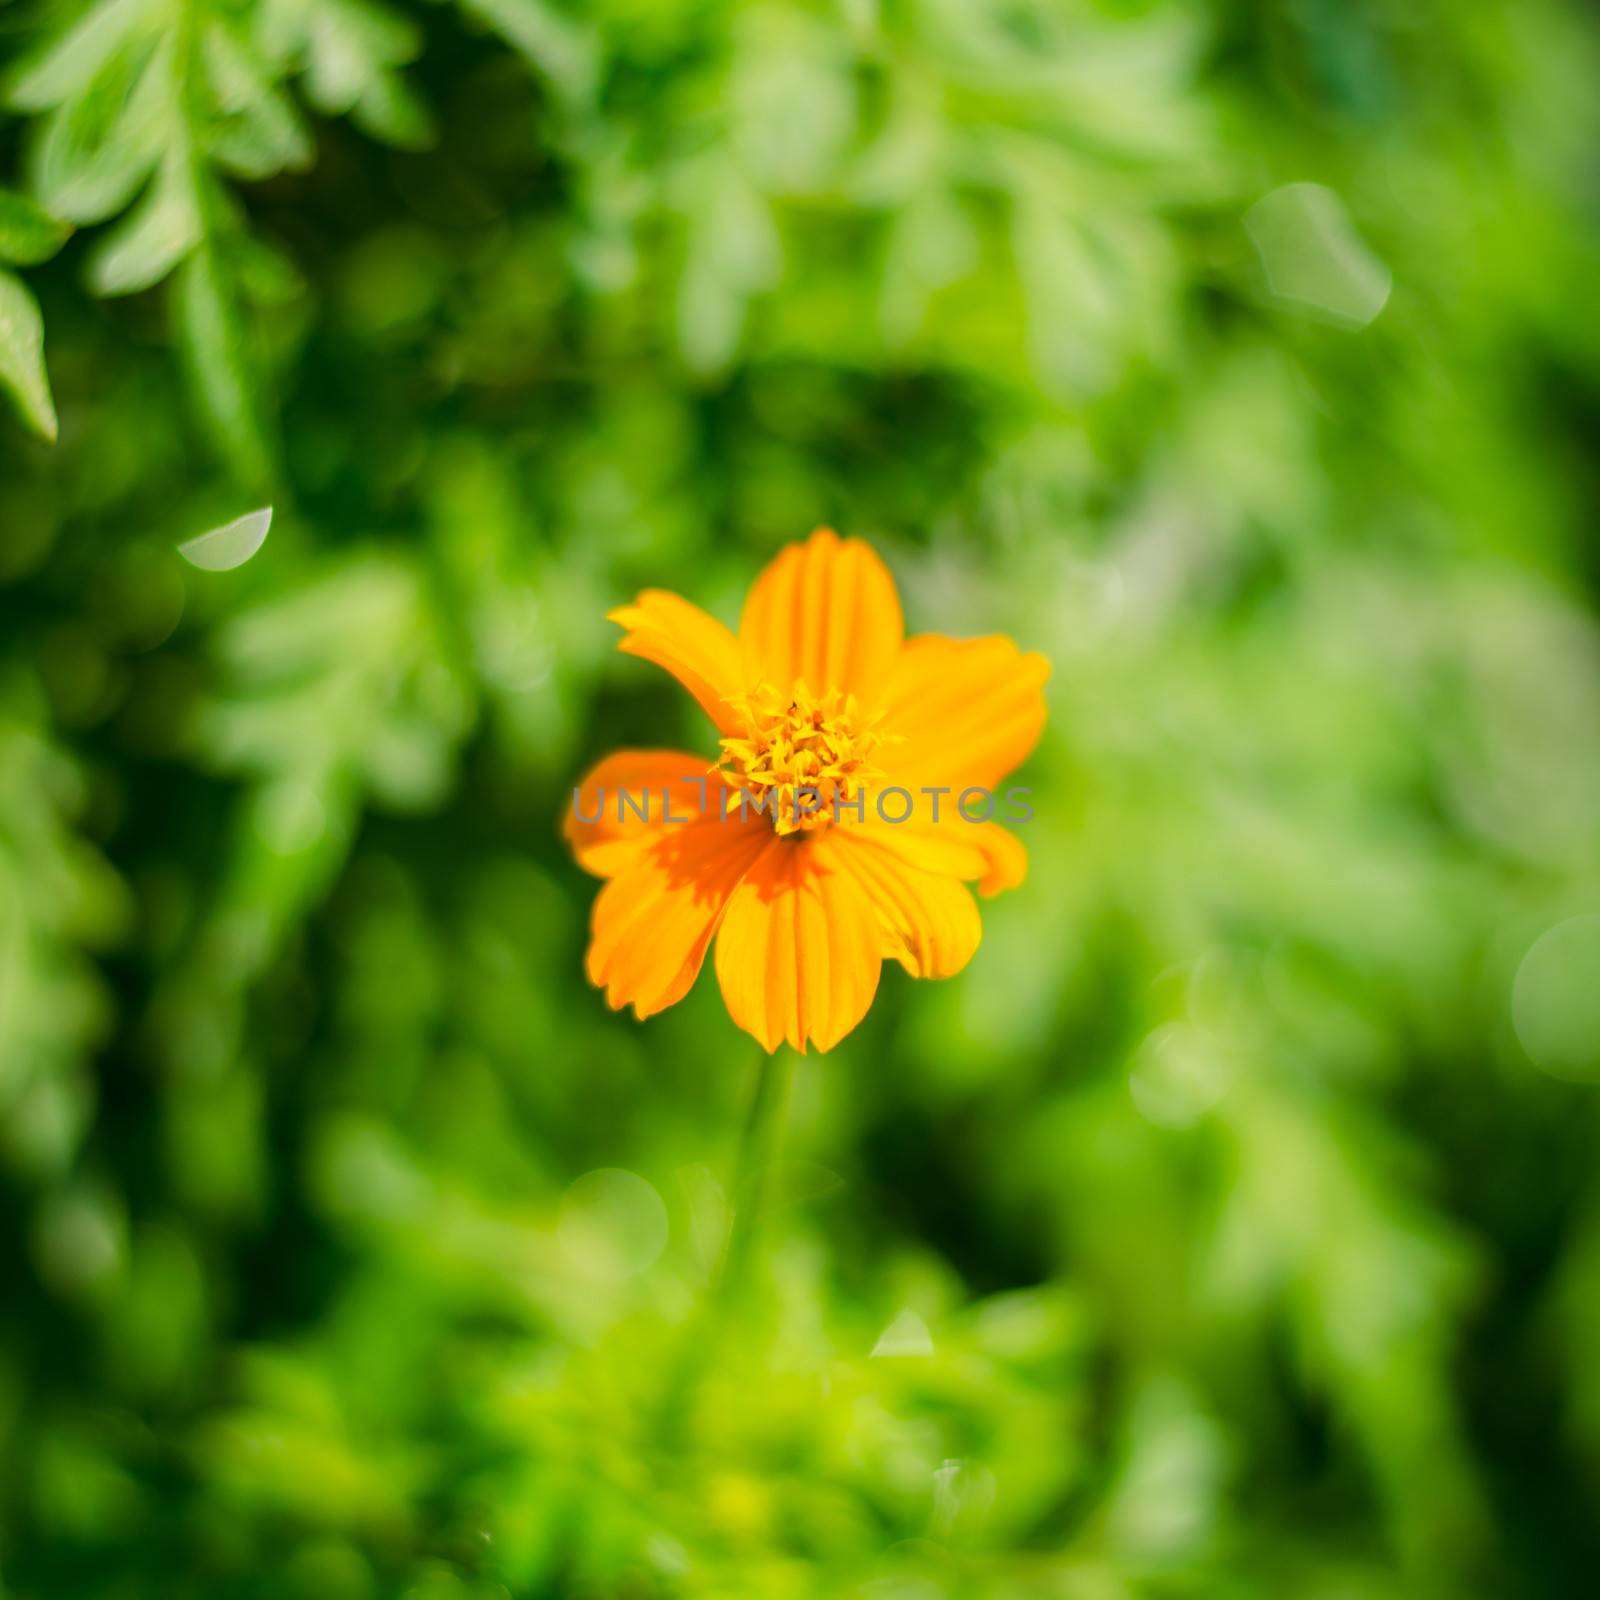  Marigold flower on green leaves background by ammza12